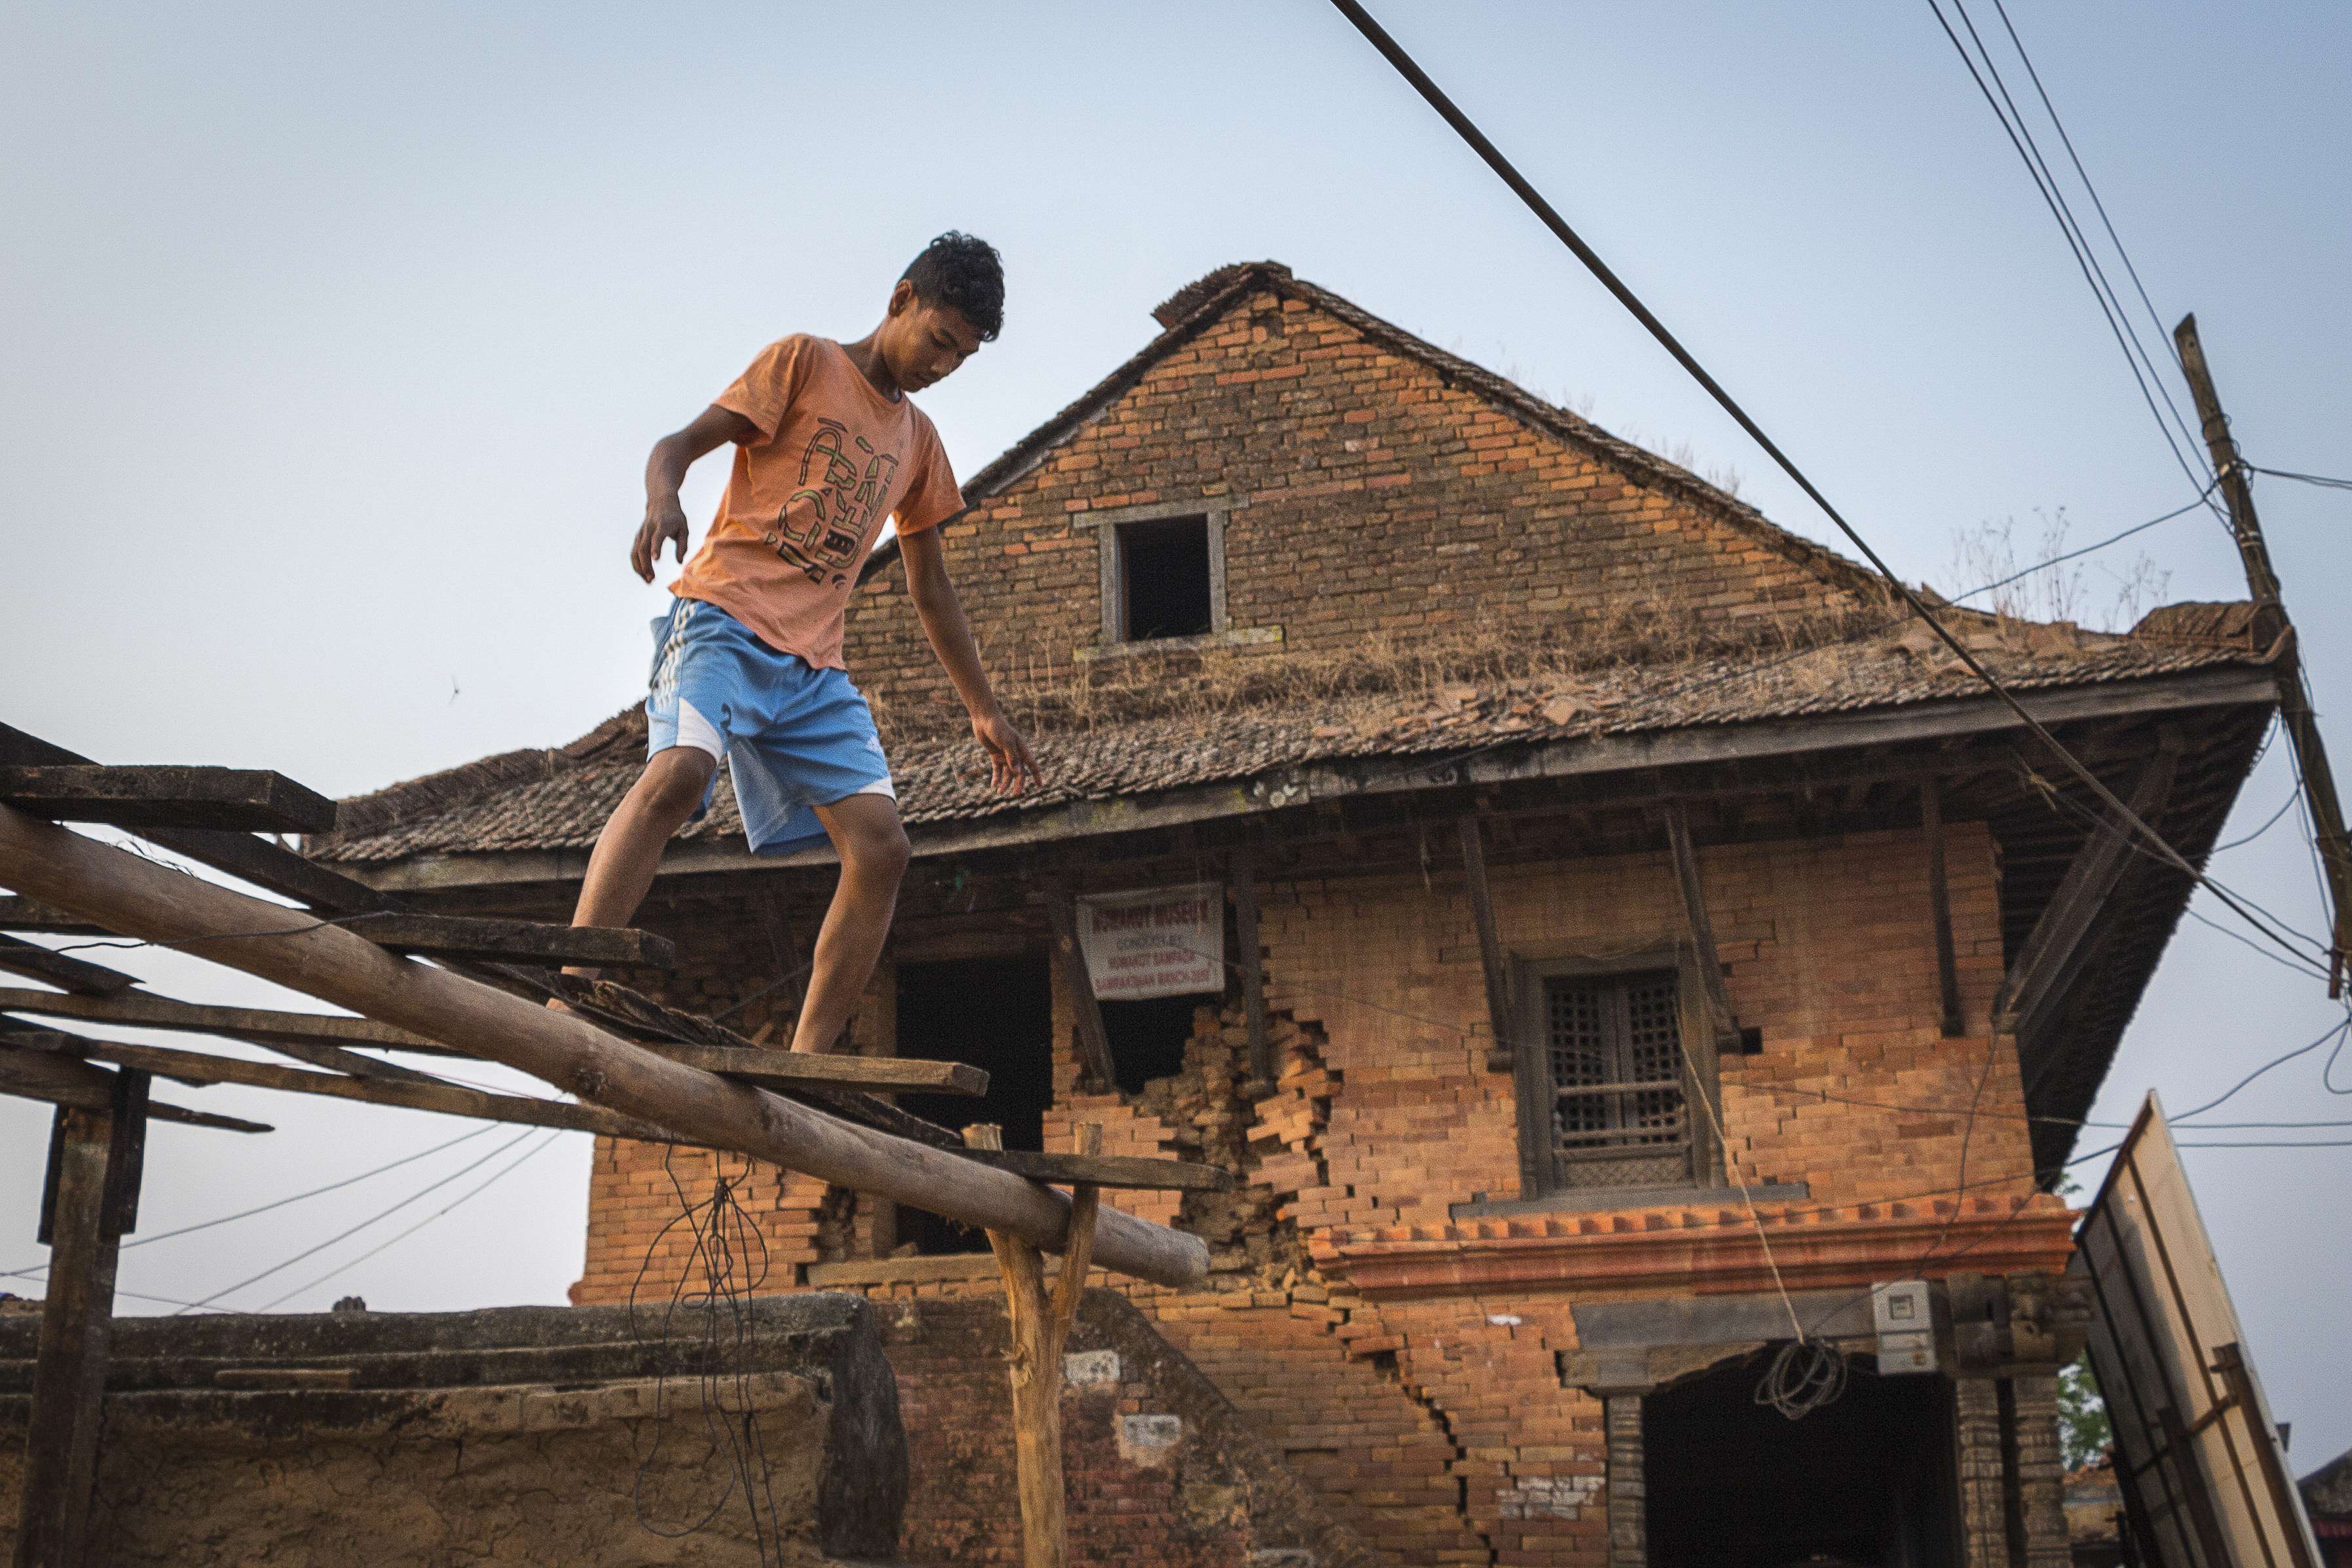 A boy works on the roof frame of a building next to the quake-damaged Bhairavi temple in the historic village of Nuwakot, Nepal, a year after the devastating April 2015 earthquake. Photos: Tessa Chan